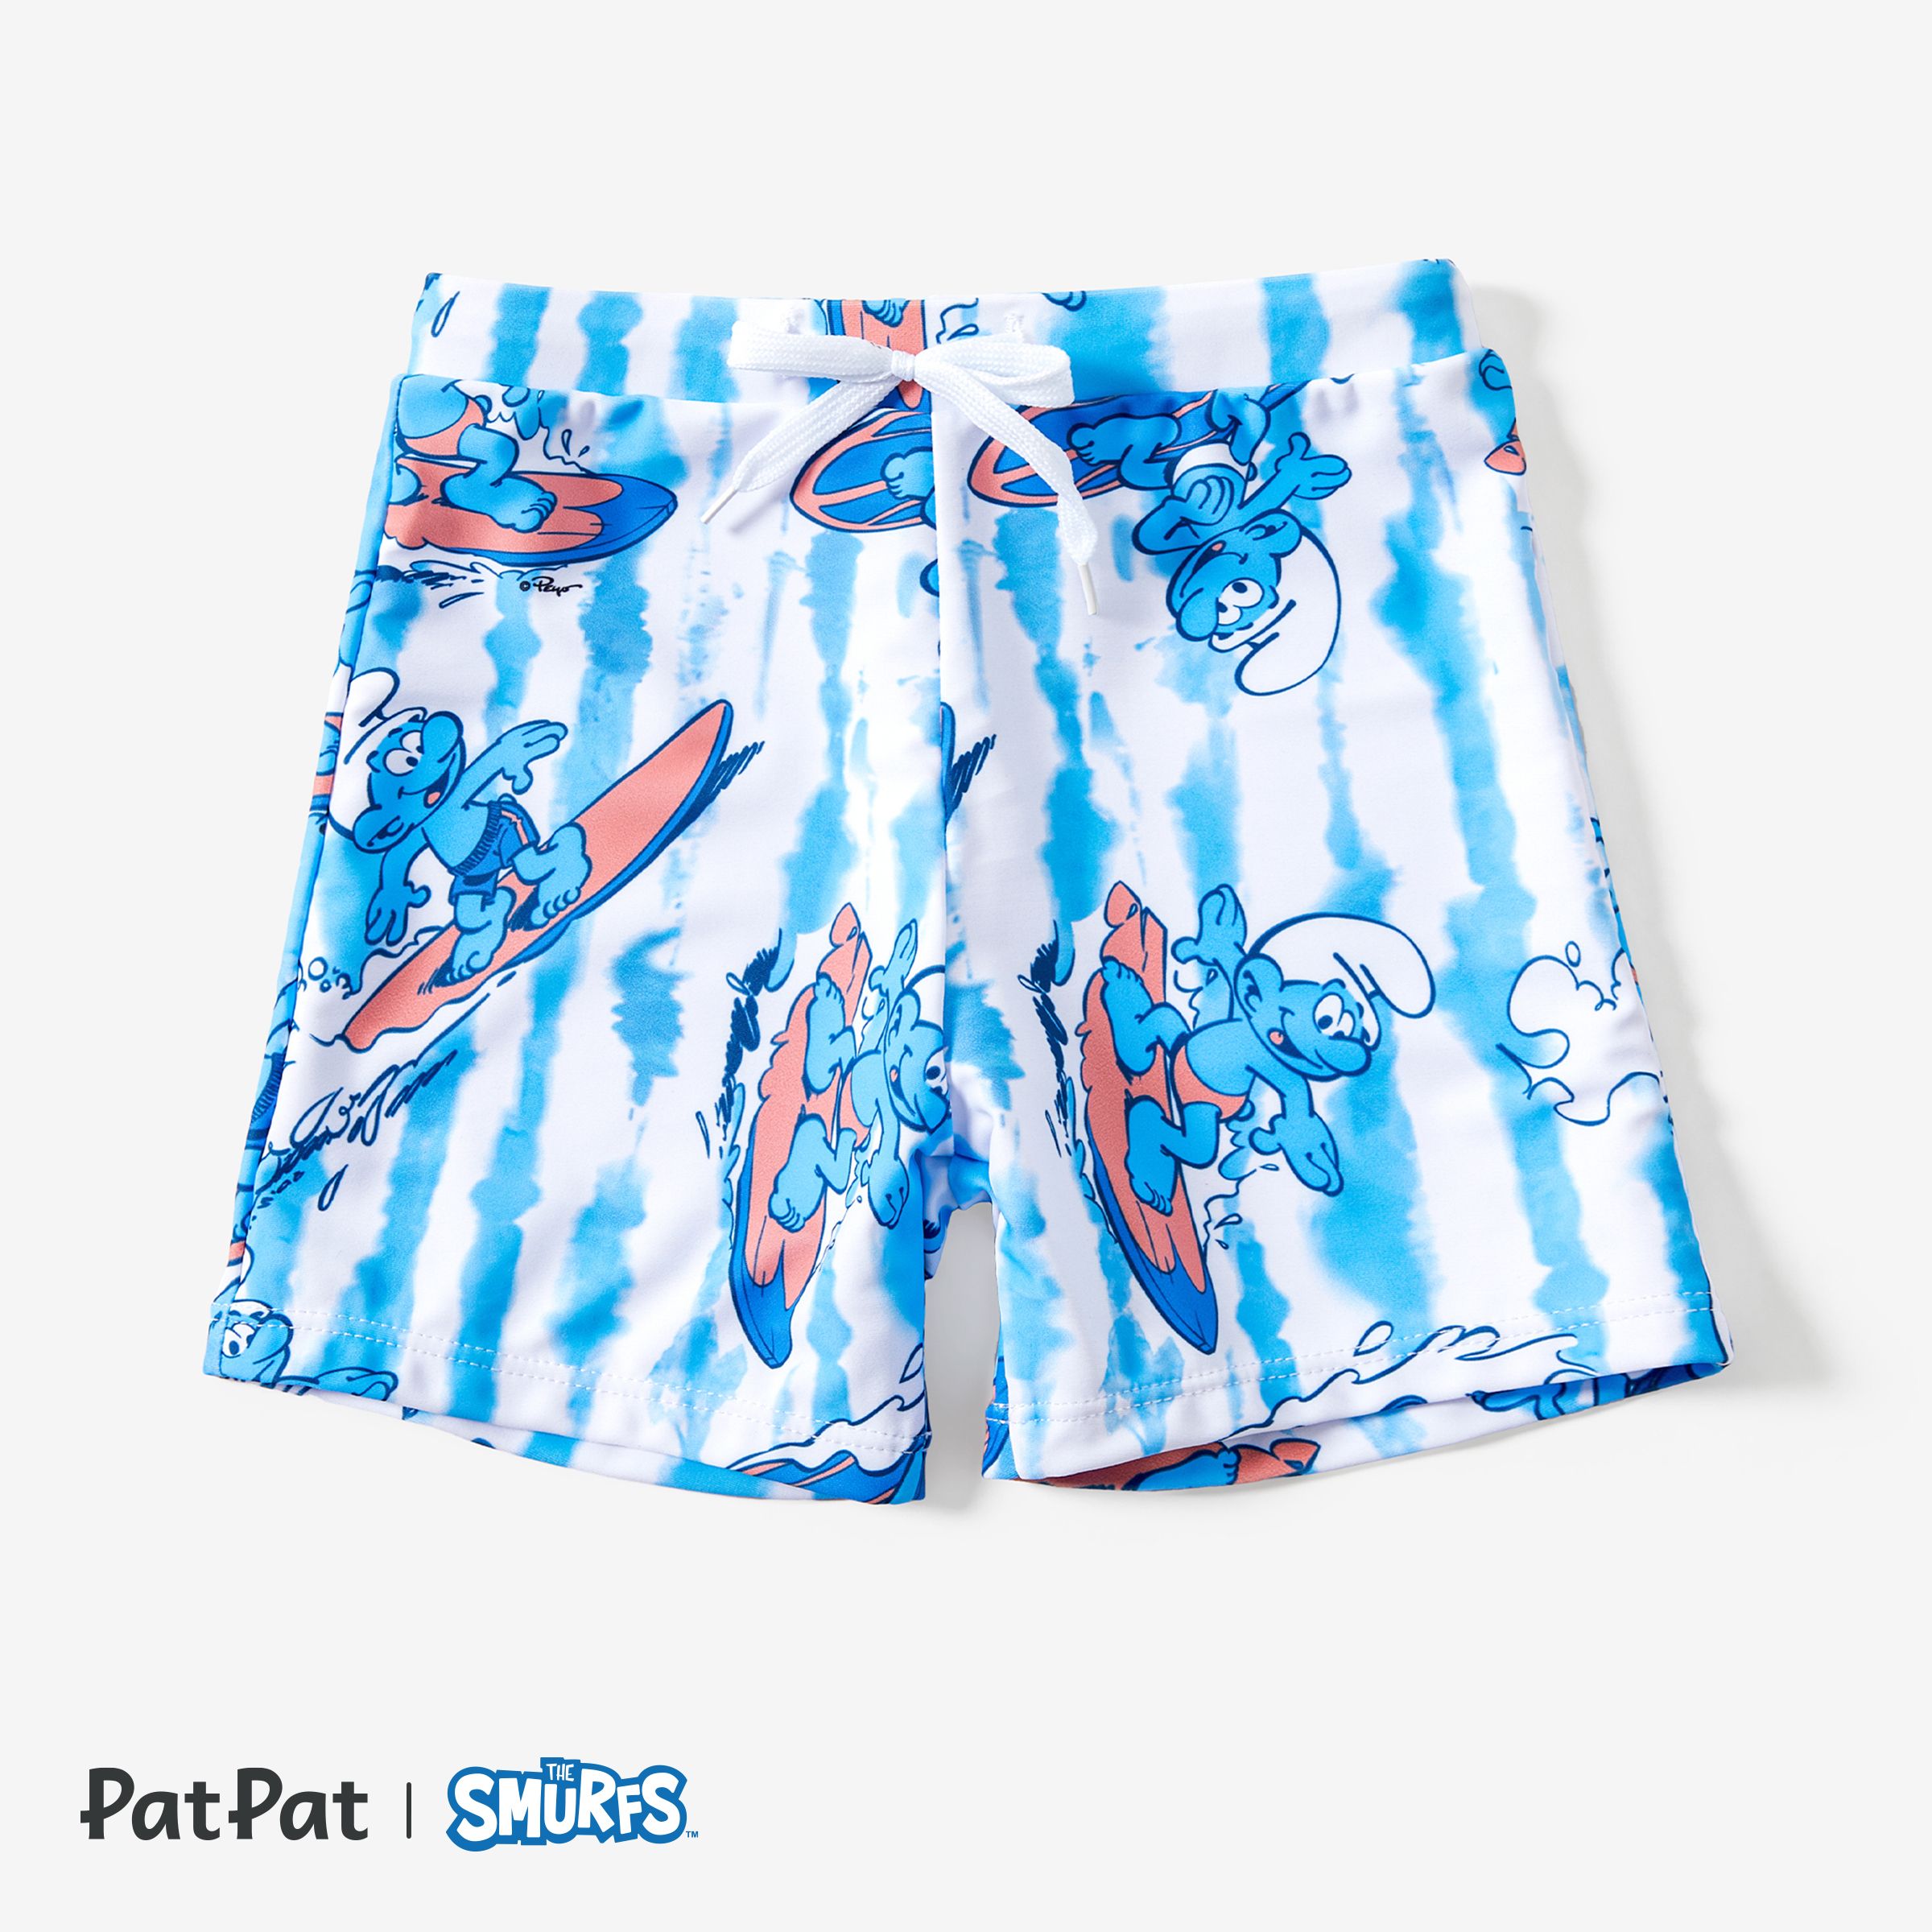 Smurfs Family Matching Graphic Stripe Pattern Swimsuit/swimming Trunks